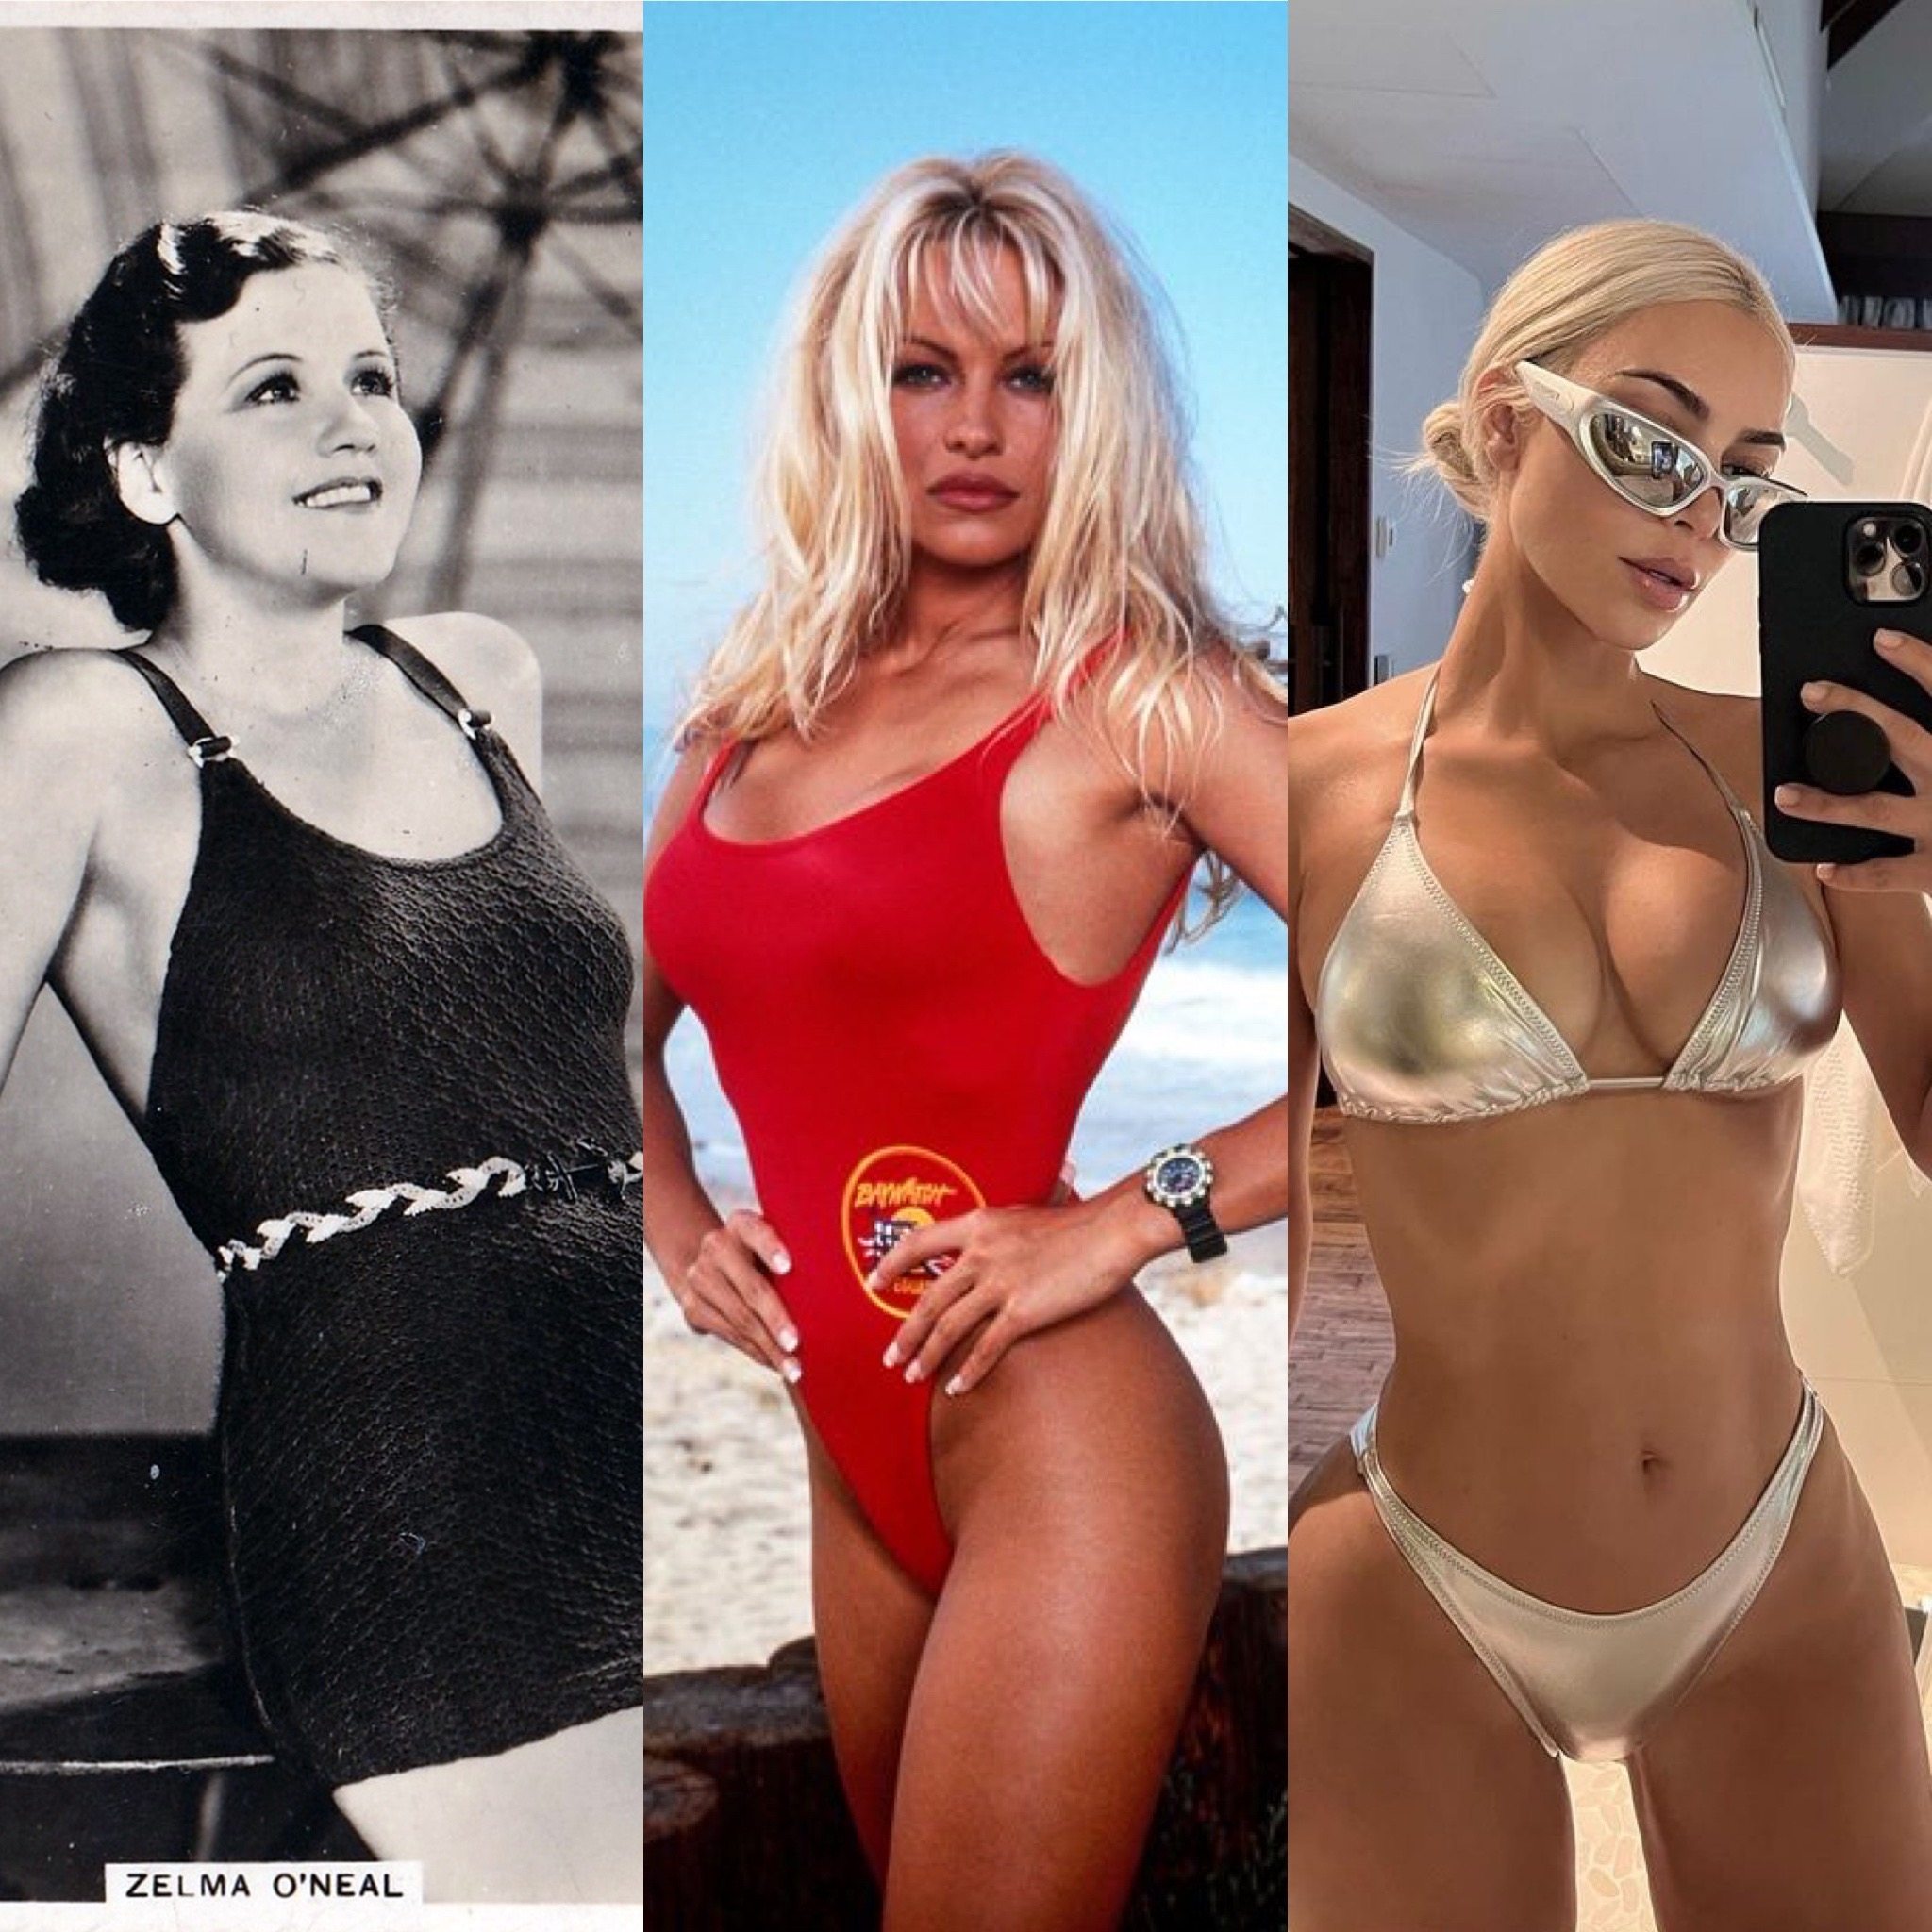 Actress Zelma O’Neal (left) in a 1930s swimsuit, Pamela Anderson (centre) in Baywatch uniform and Kim Kardashian in an Instagram-ready outfit more suited to poolside than the water. Photos: Getty Images/Instagram